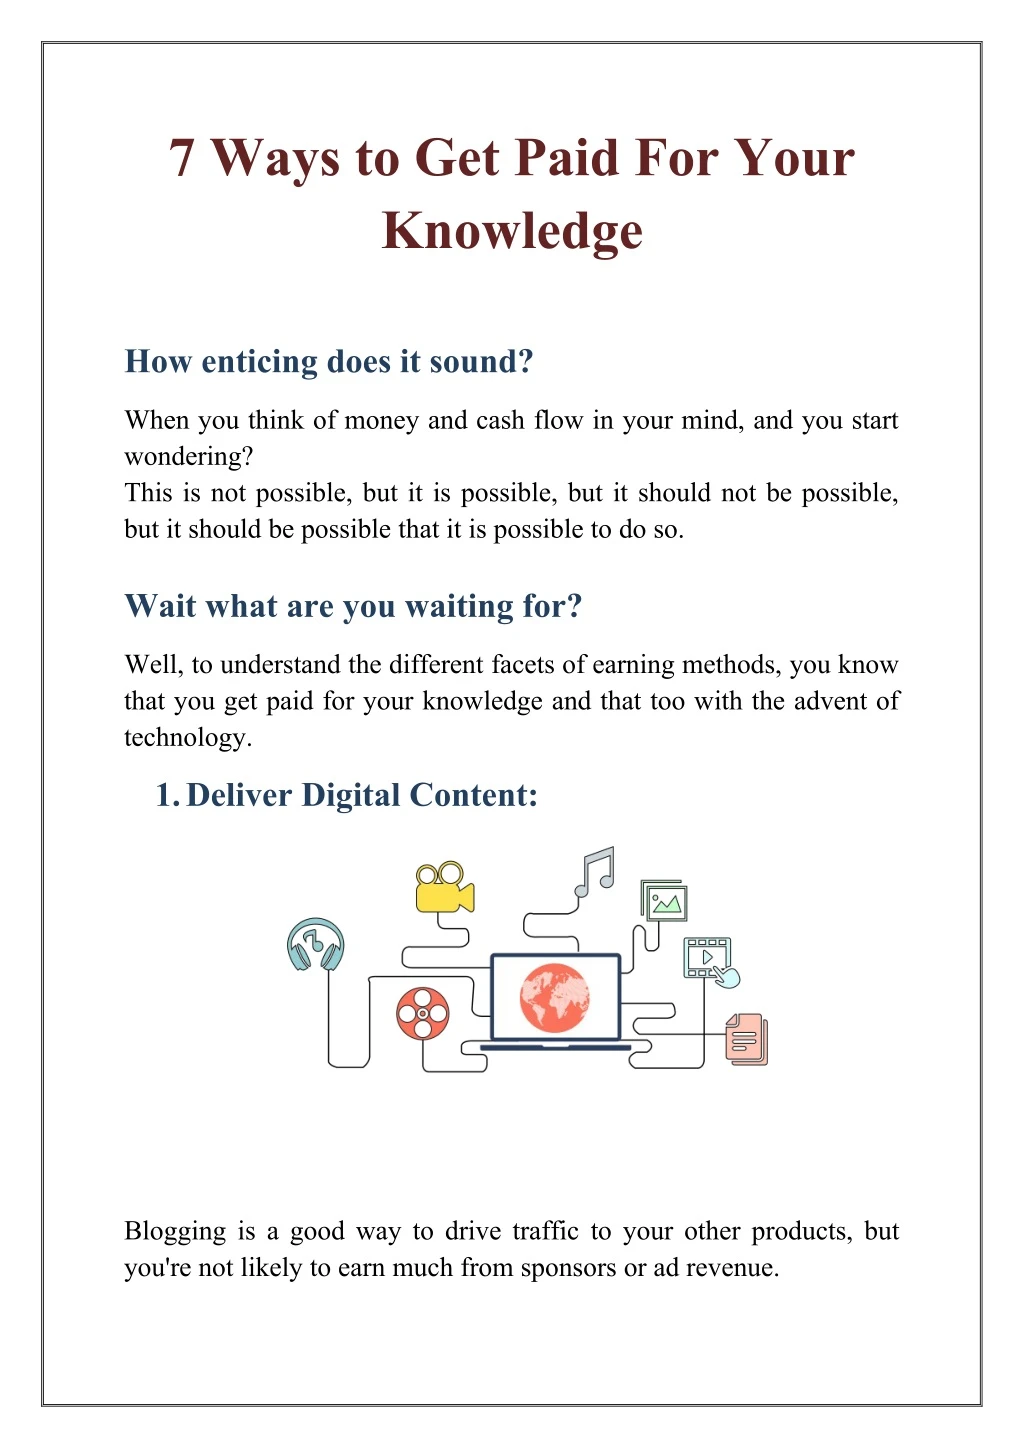 7 ways to get paid for your knowledge